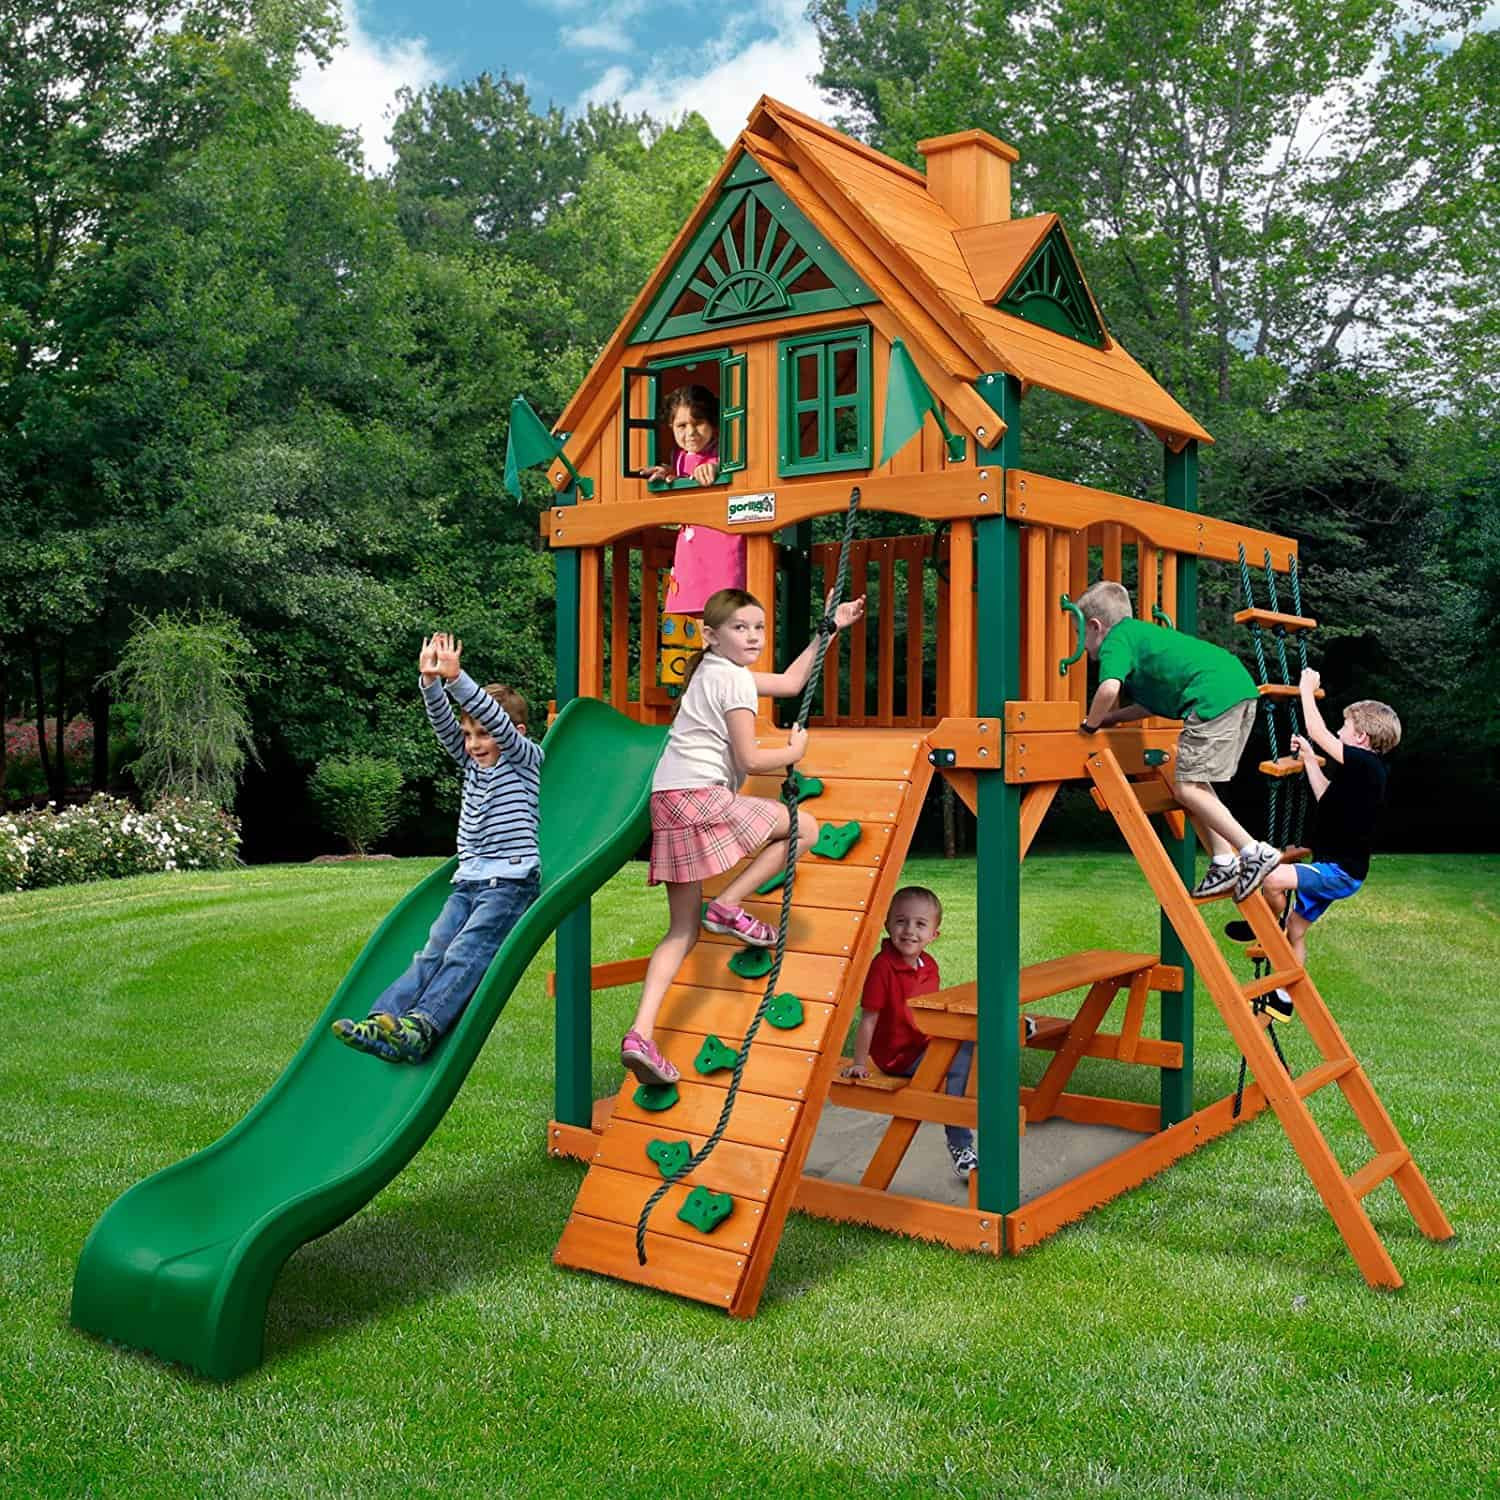 Backyard Swing Set For Kids
 Swing Sets for Small Yards The Backyard Site